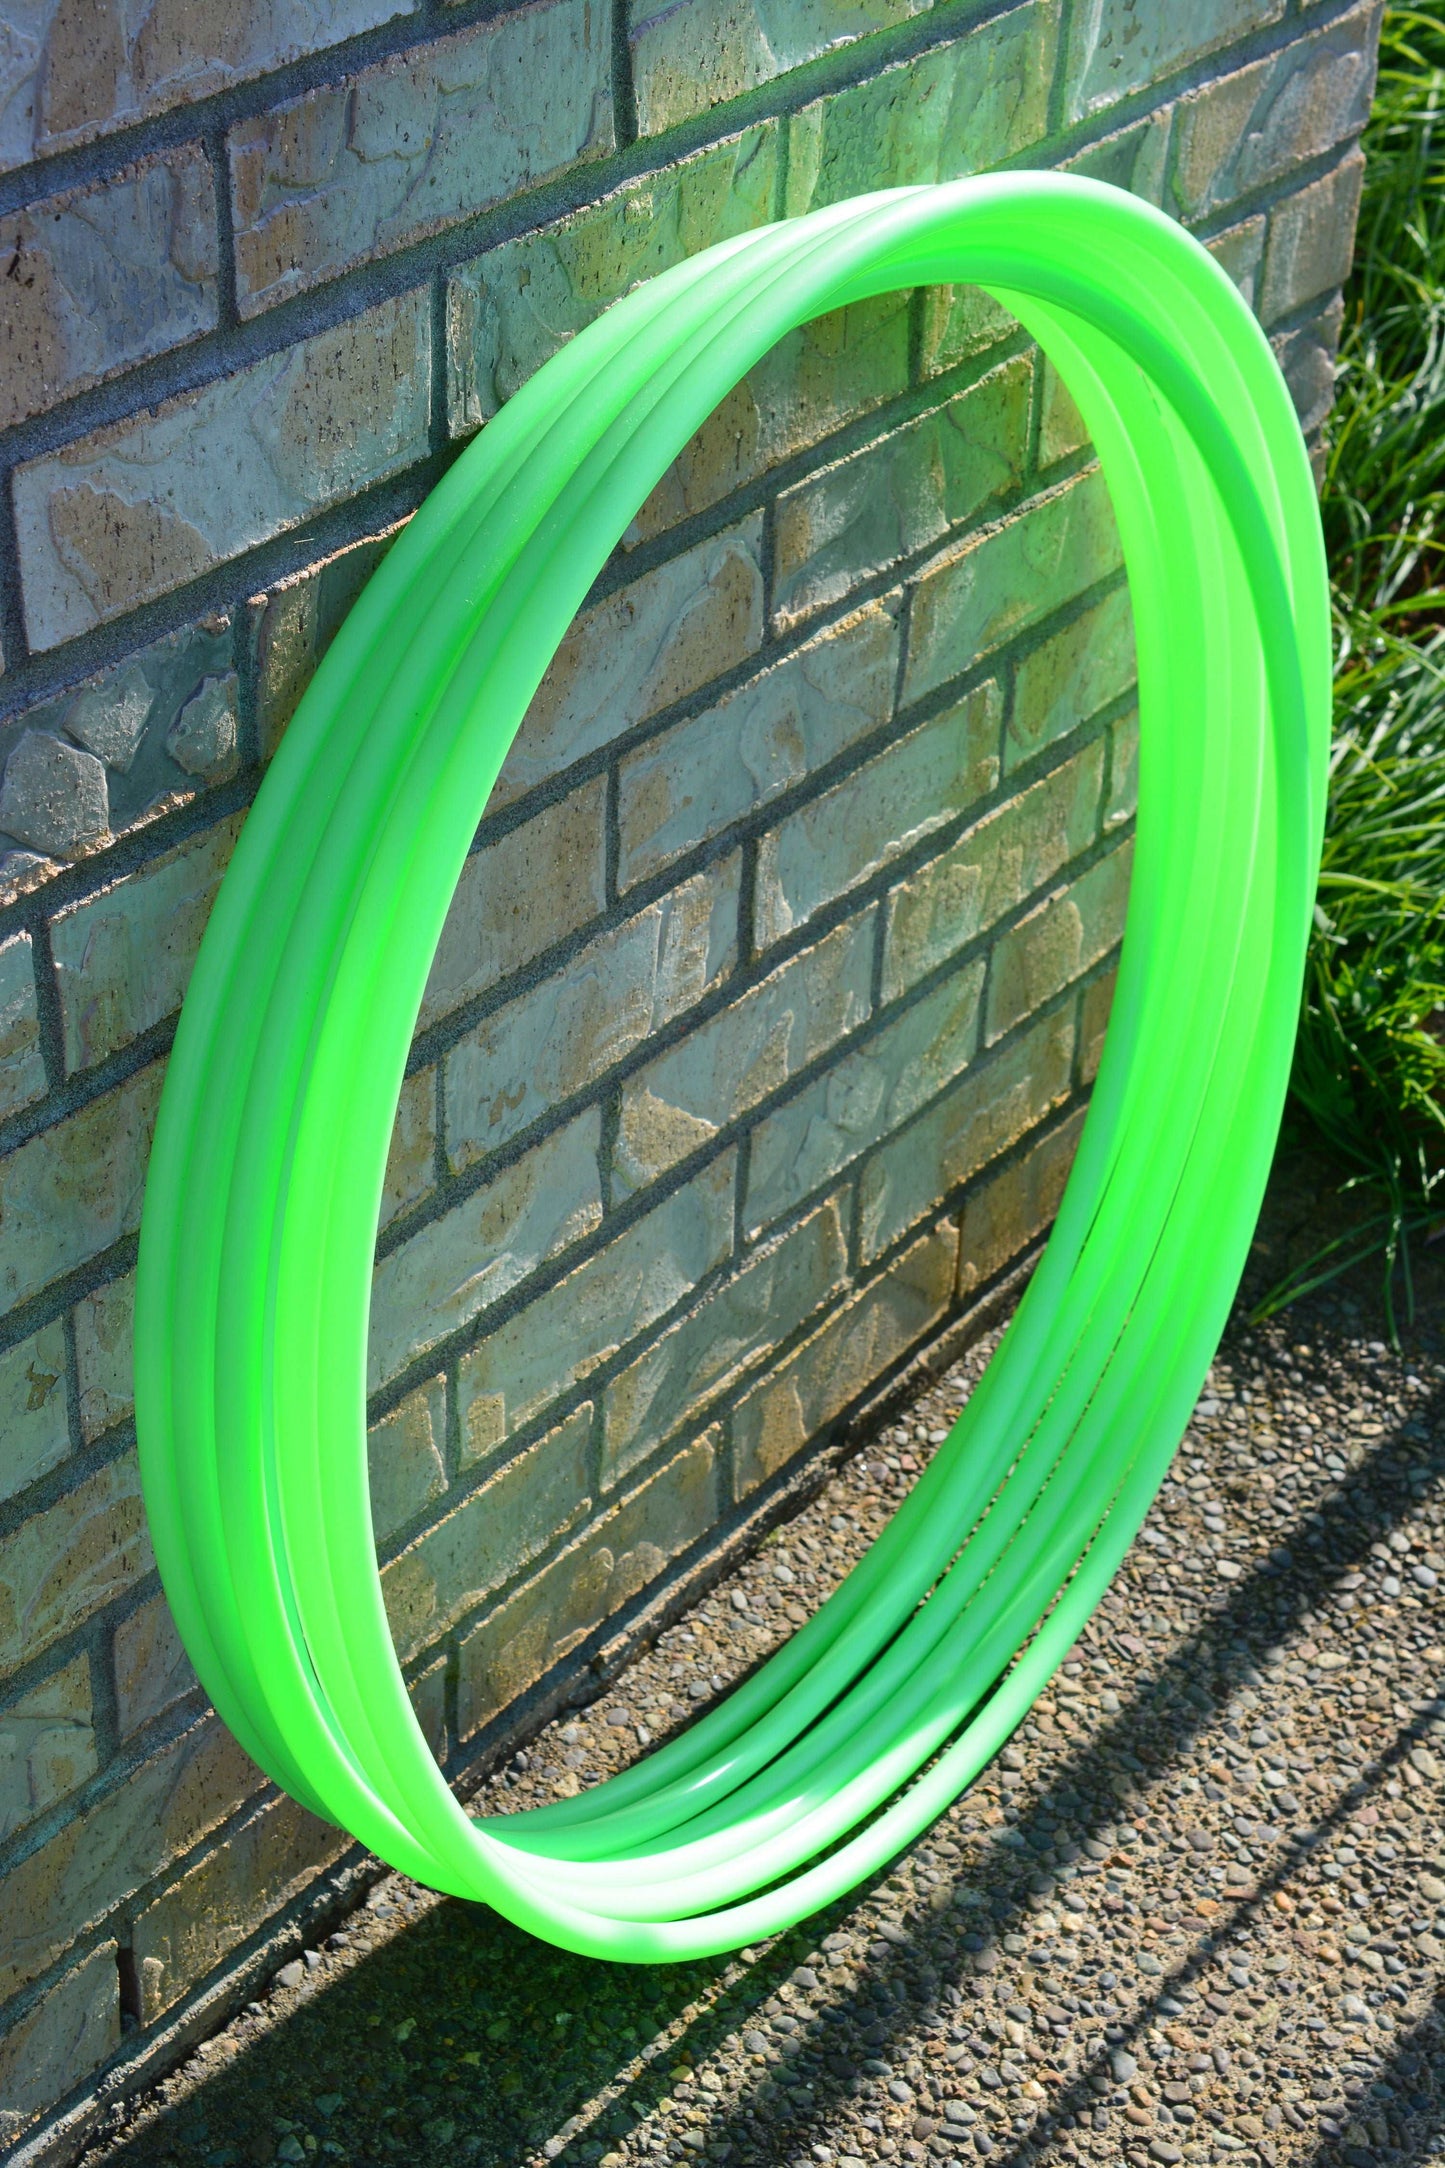 3/4 UV Glow in the Dark Colored Polypro Hoops